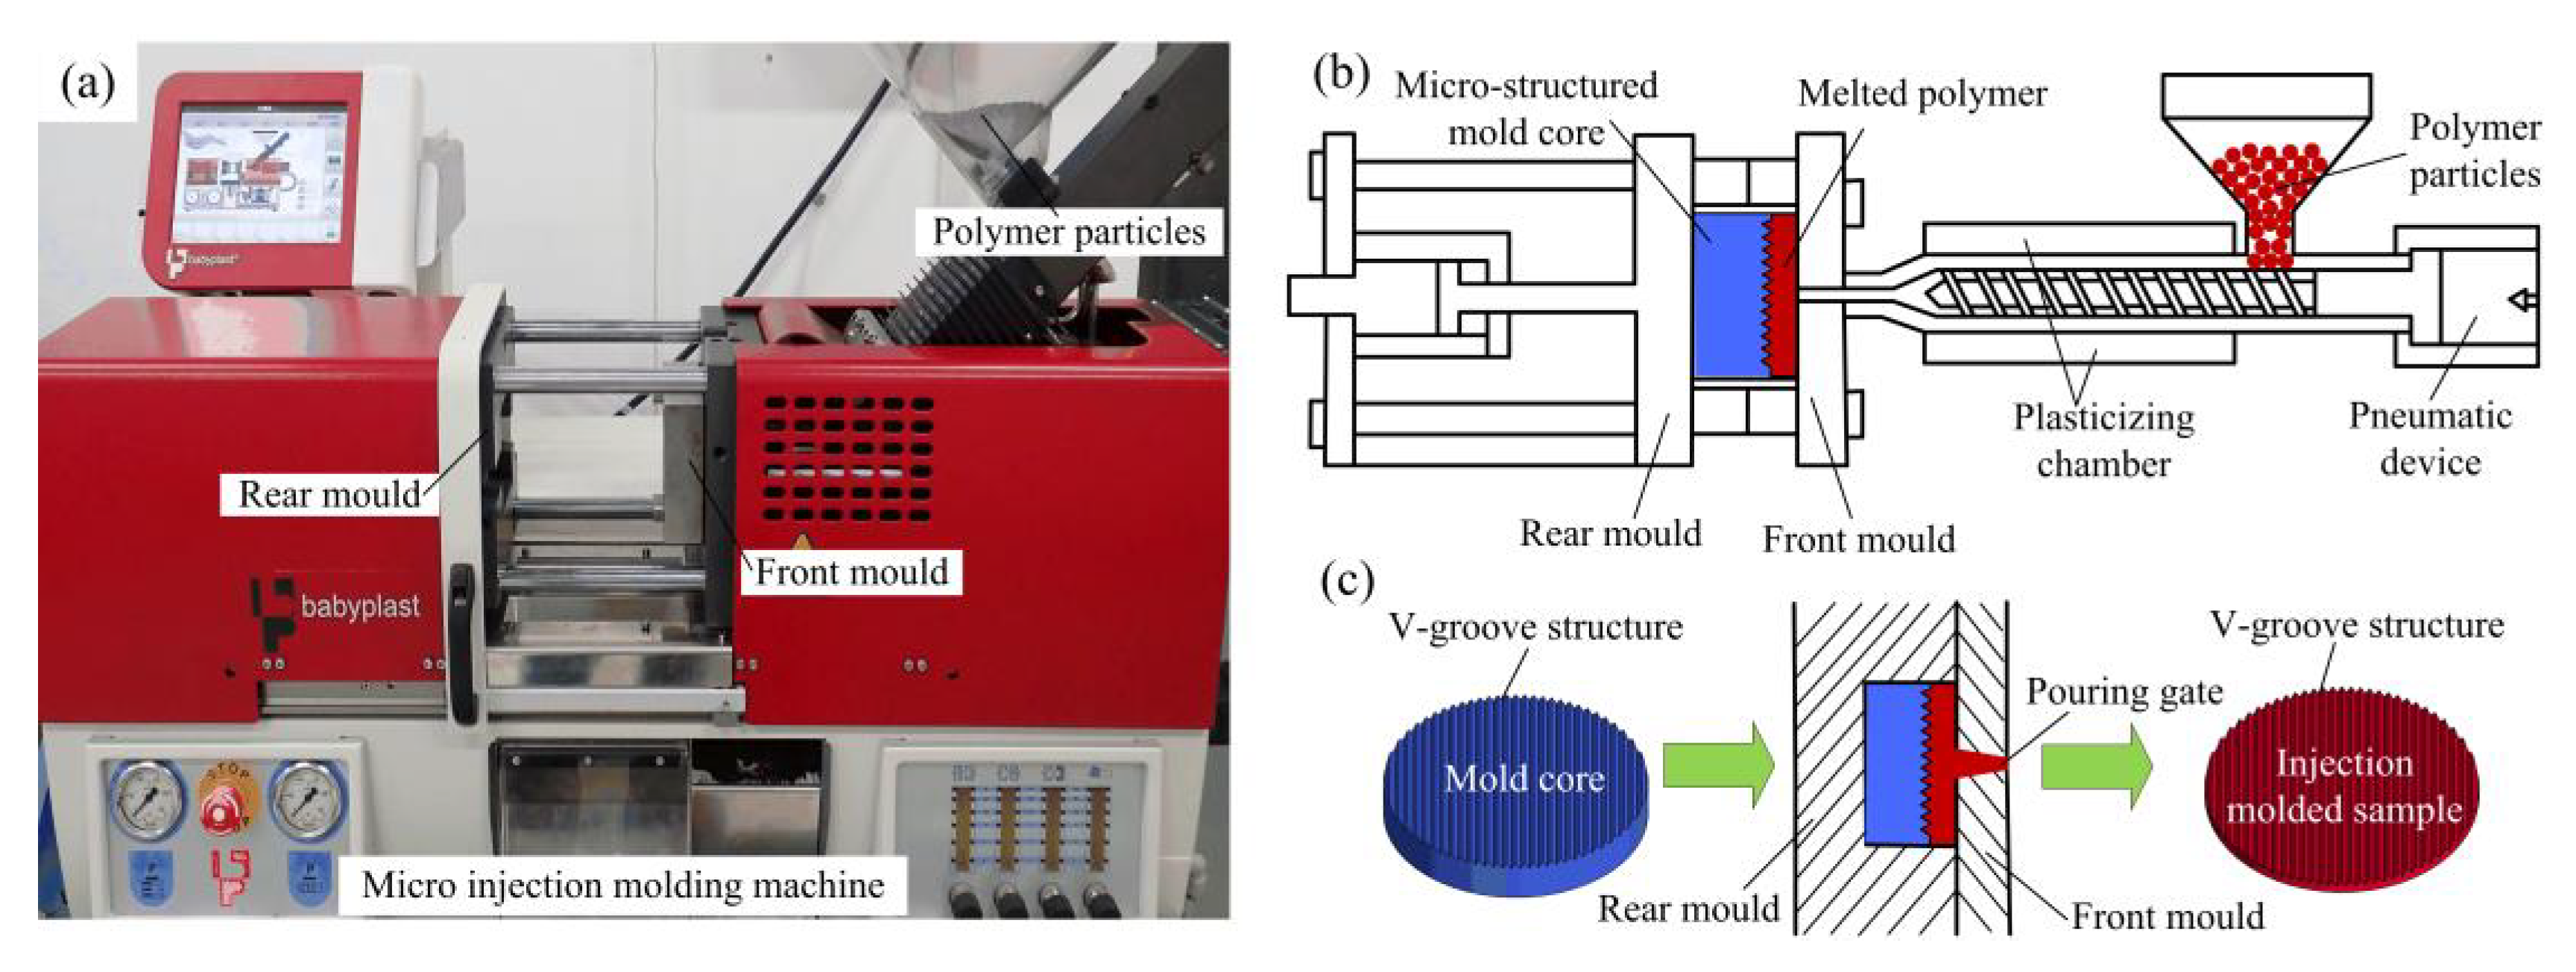 Polymers | Free Full-Text | Fabrication of Micro-Structured LED Diffusion  Plate Using Efficient Micro Injection Molding and Micro-Ground Mold Core